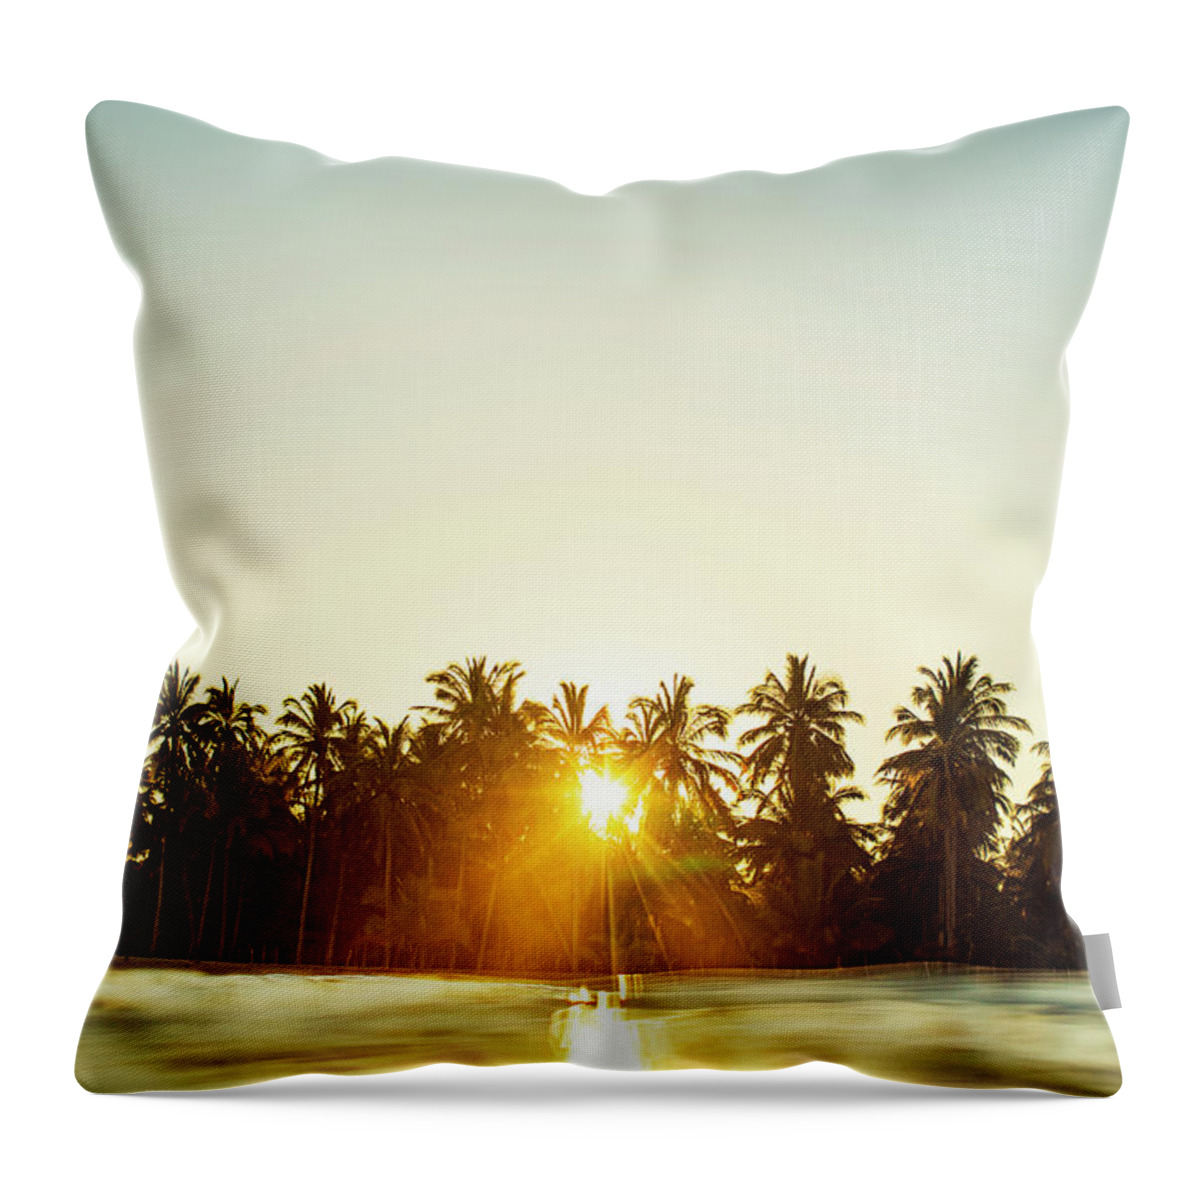 Surfing Throw Pillow featuring the photograph Palms And Rays by Nik West